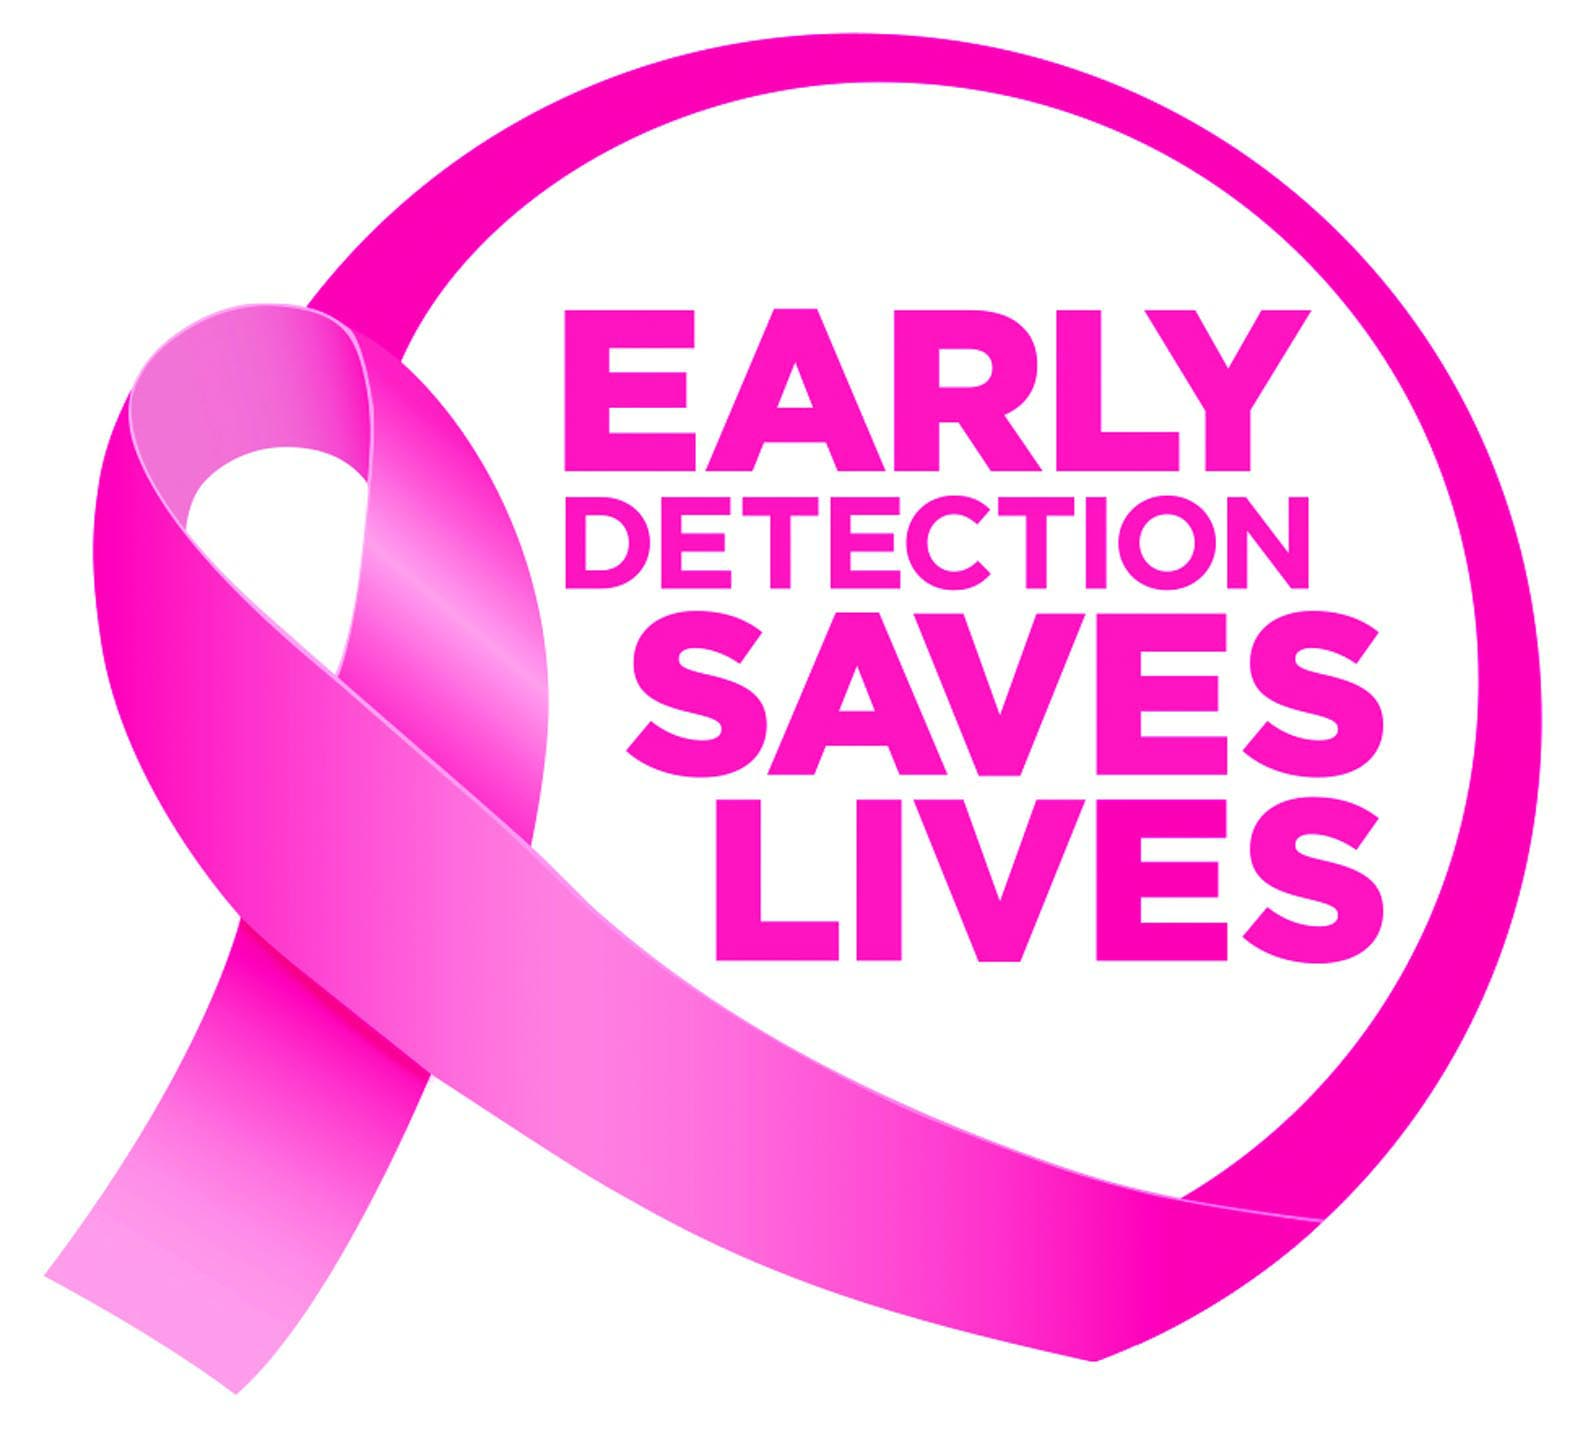 ABC Insurance is hosting its annual CHI Memorial Mary Ellen Locher Breast Center Mobile Mammography